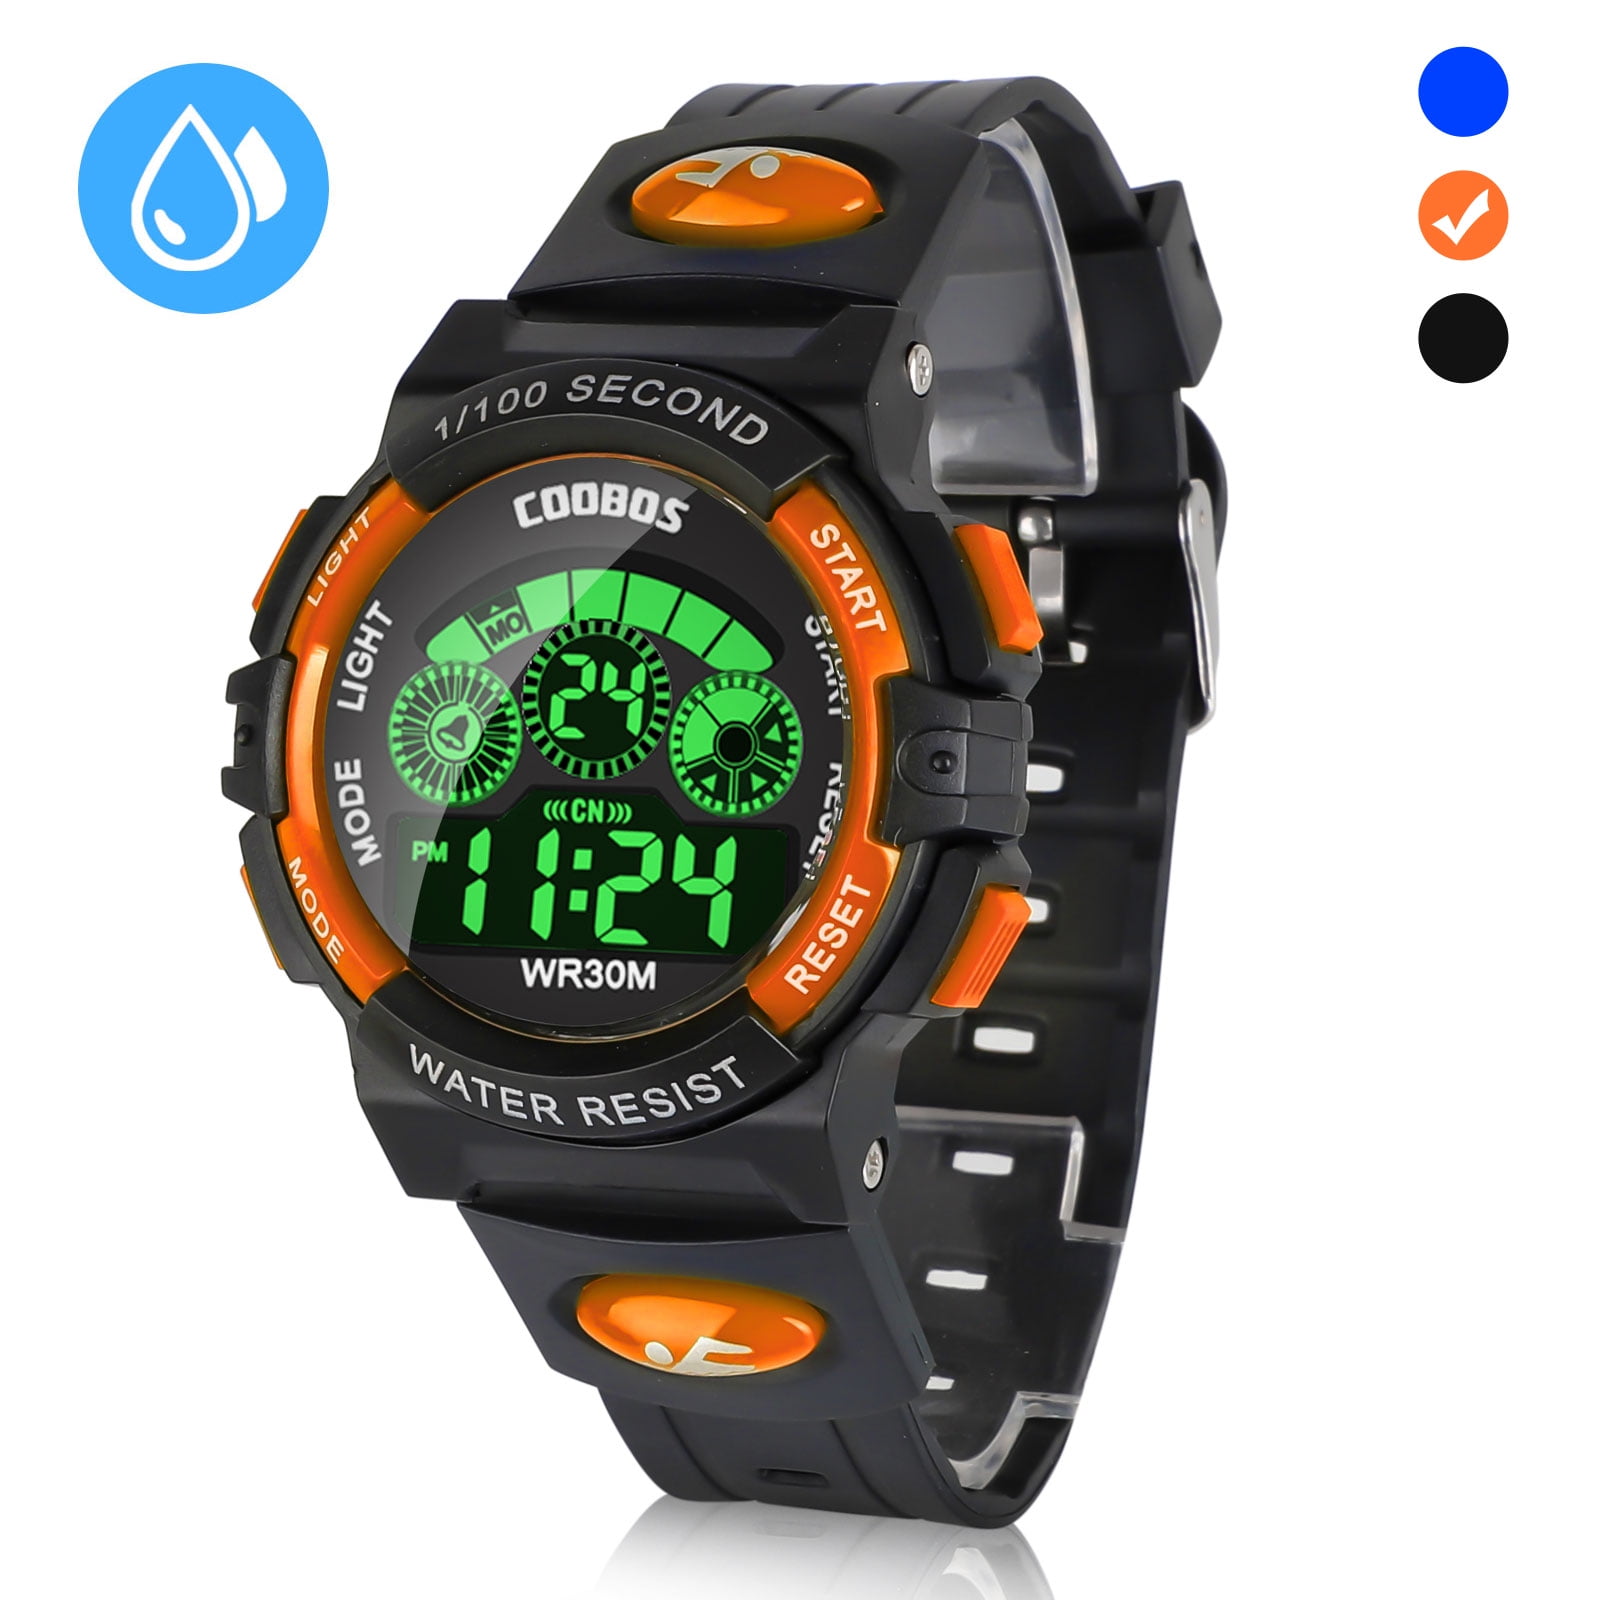 TSV - Kids Digital Watch, Boys Sports Waterproof Led Watches with Alarm, Stopwatch, Multifunctional Outdoor Electronic Analog Quartz Wrist Watches with Colorful LED Display, Gift for Boy Girls Children